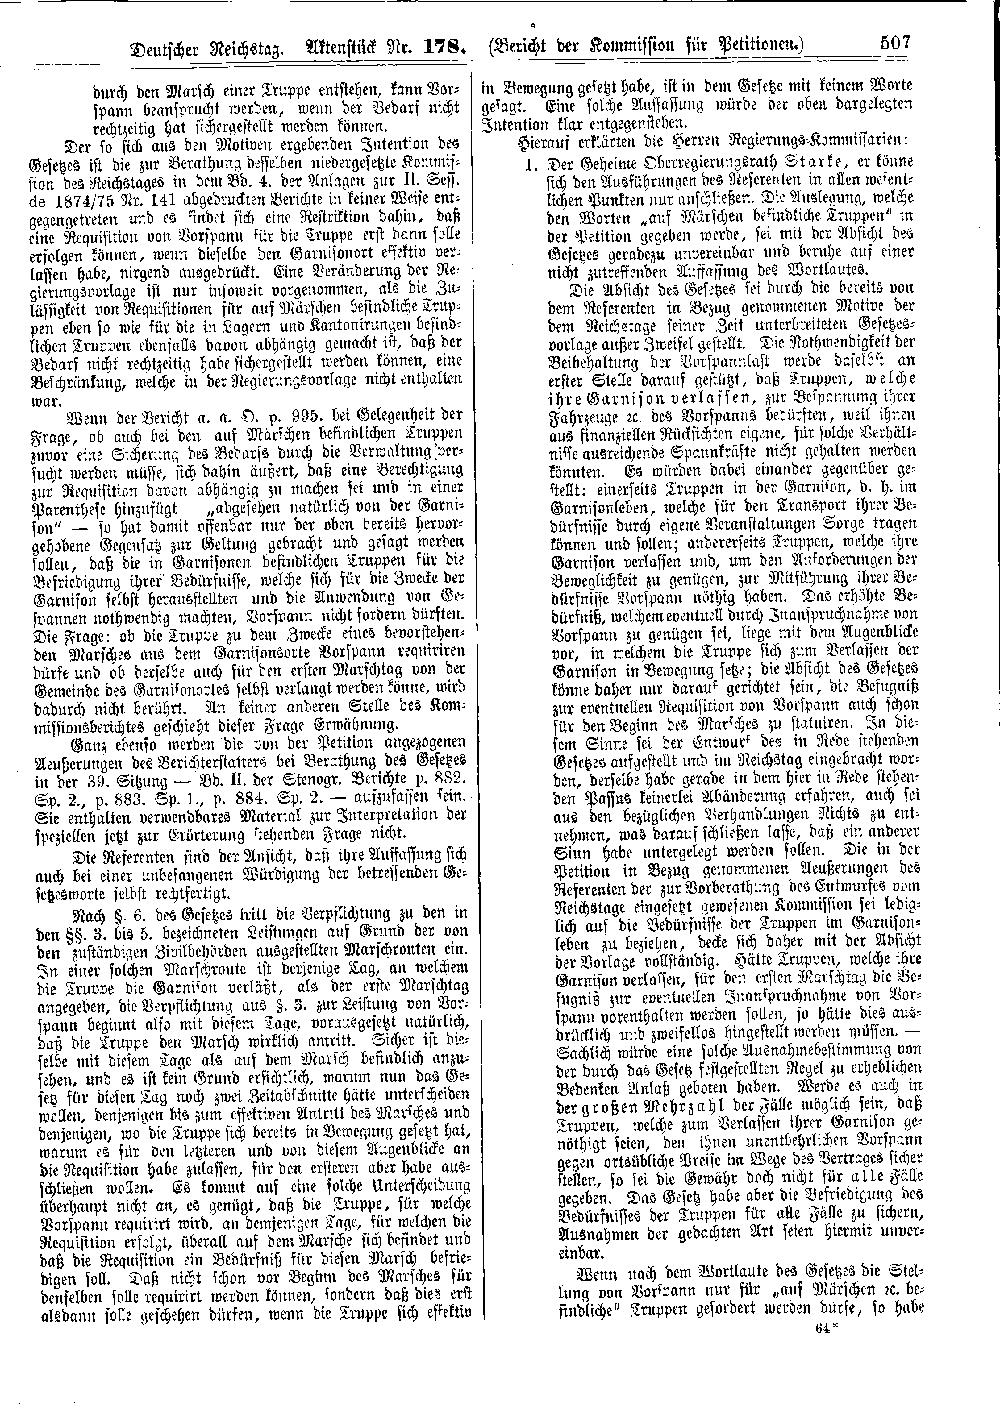 Scan of page 507